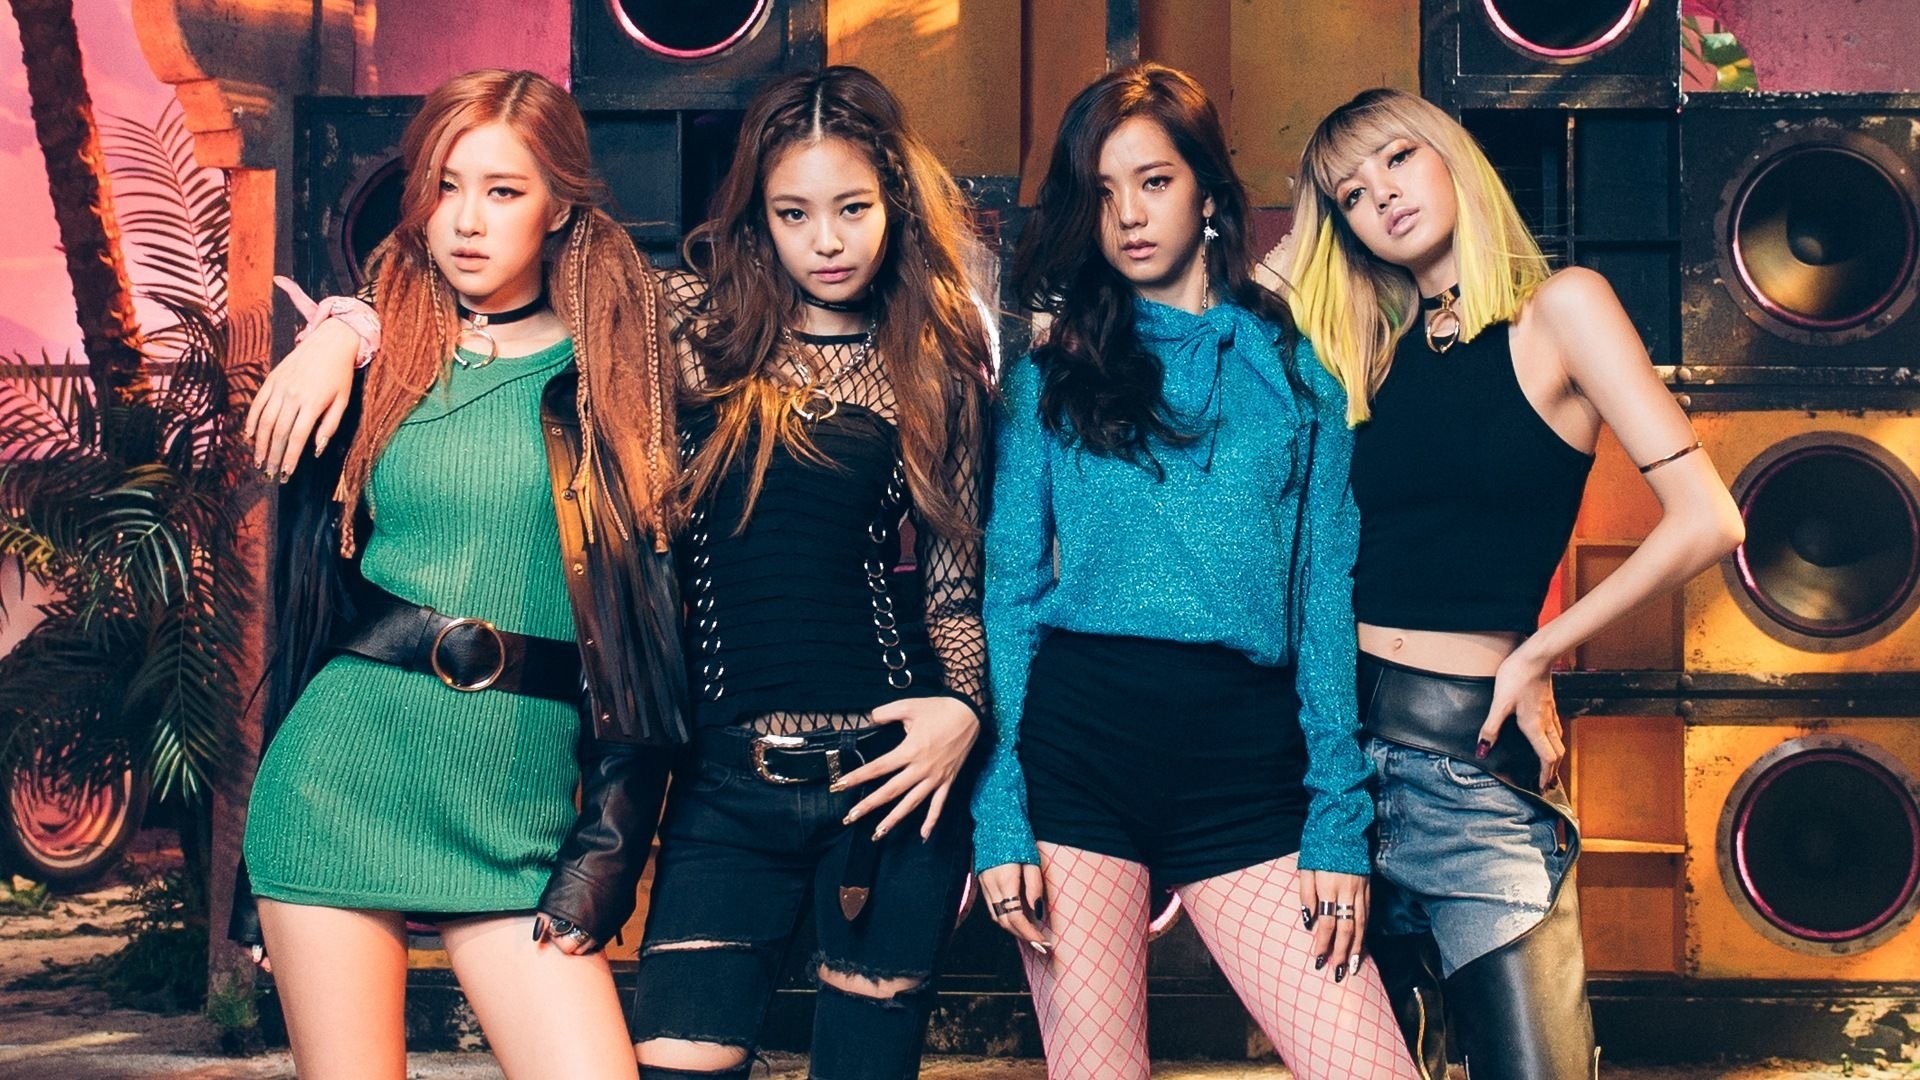 Best Blackpink Wallpaper with high-resolution 1920x1080 pixel. You can use this wallpaper for your Windows and Mac OS computers as well as your Android and iPhone smartphones